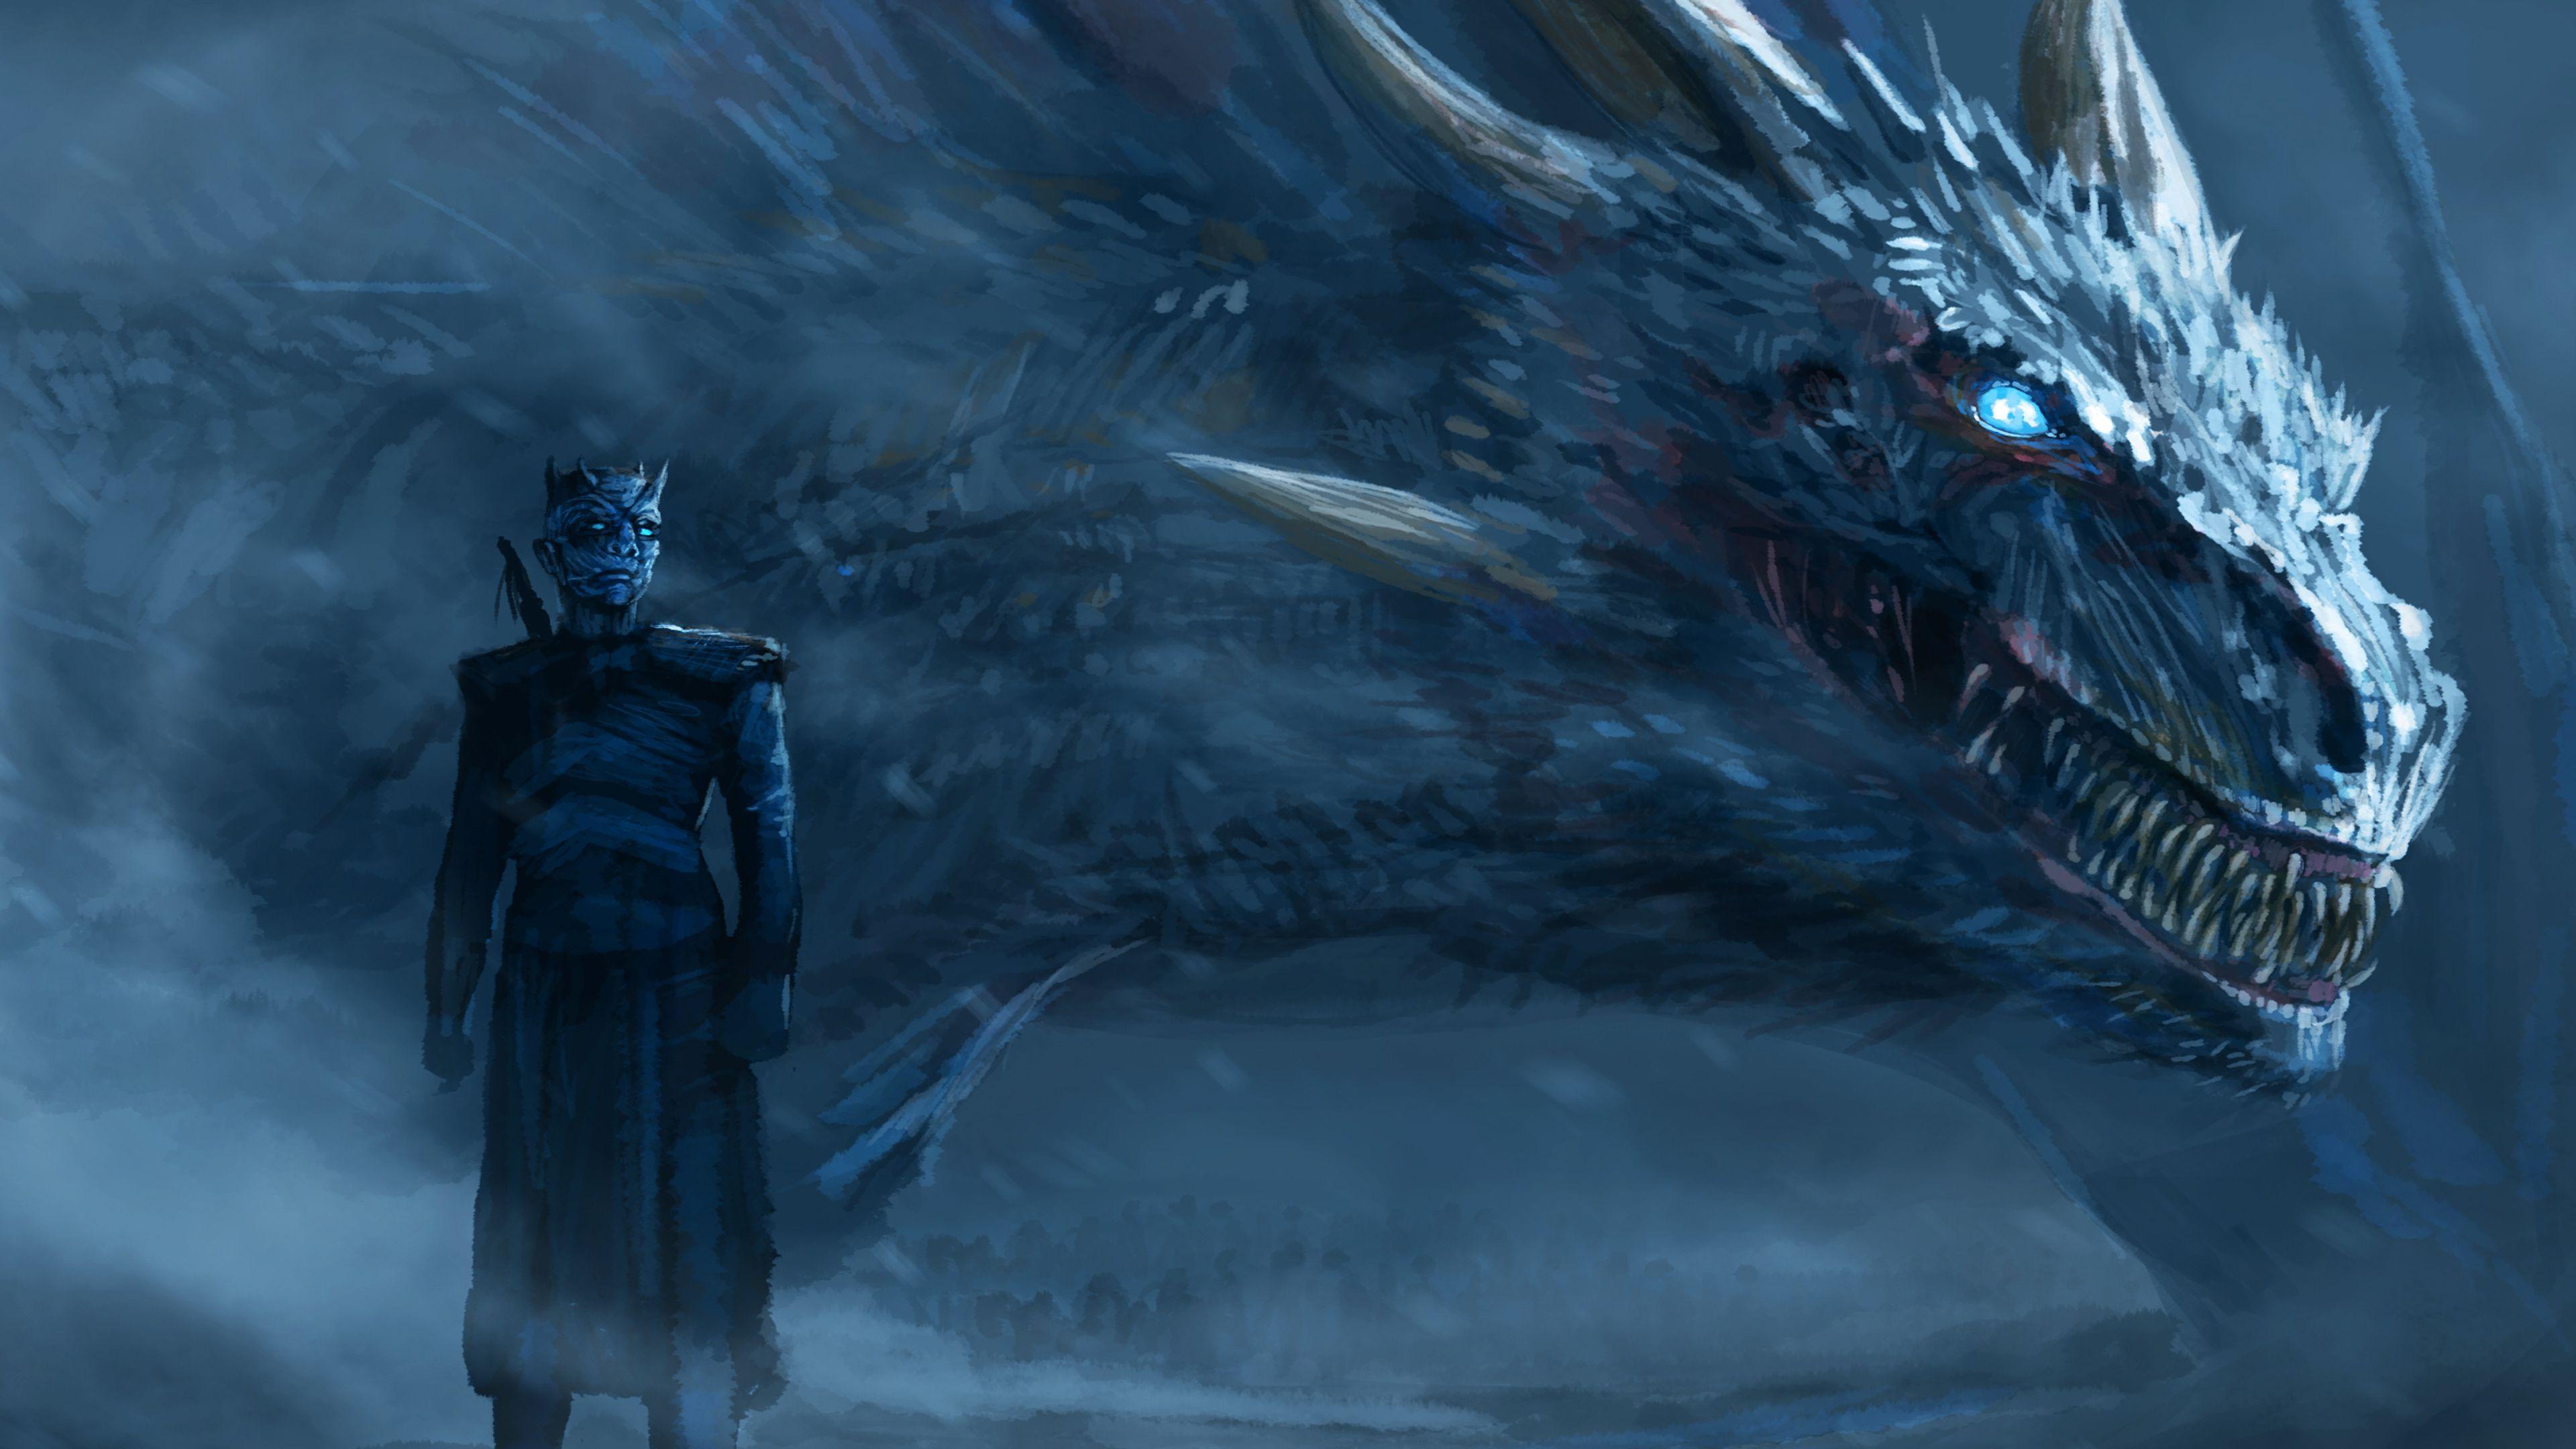 Game of Thrones Dragons Wallpaper Free Game of Thrones